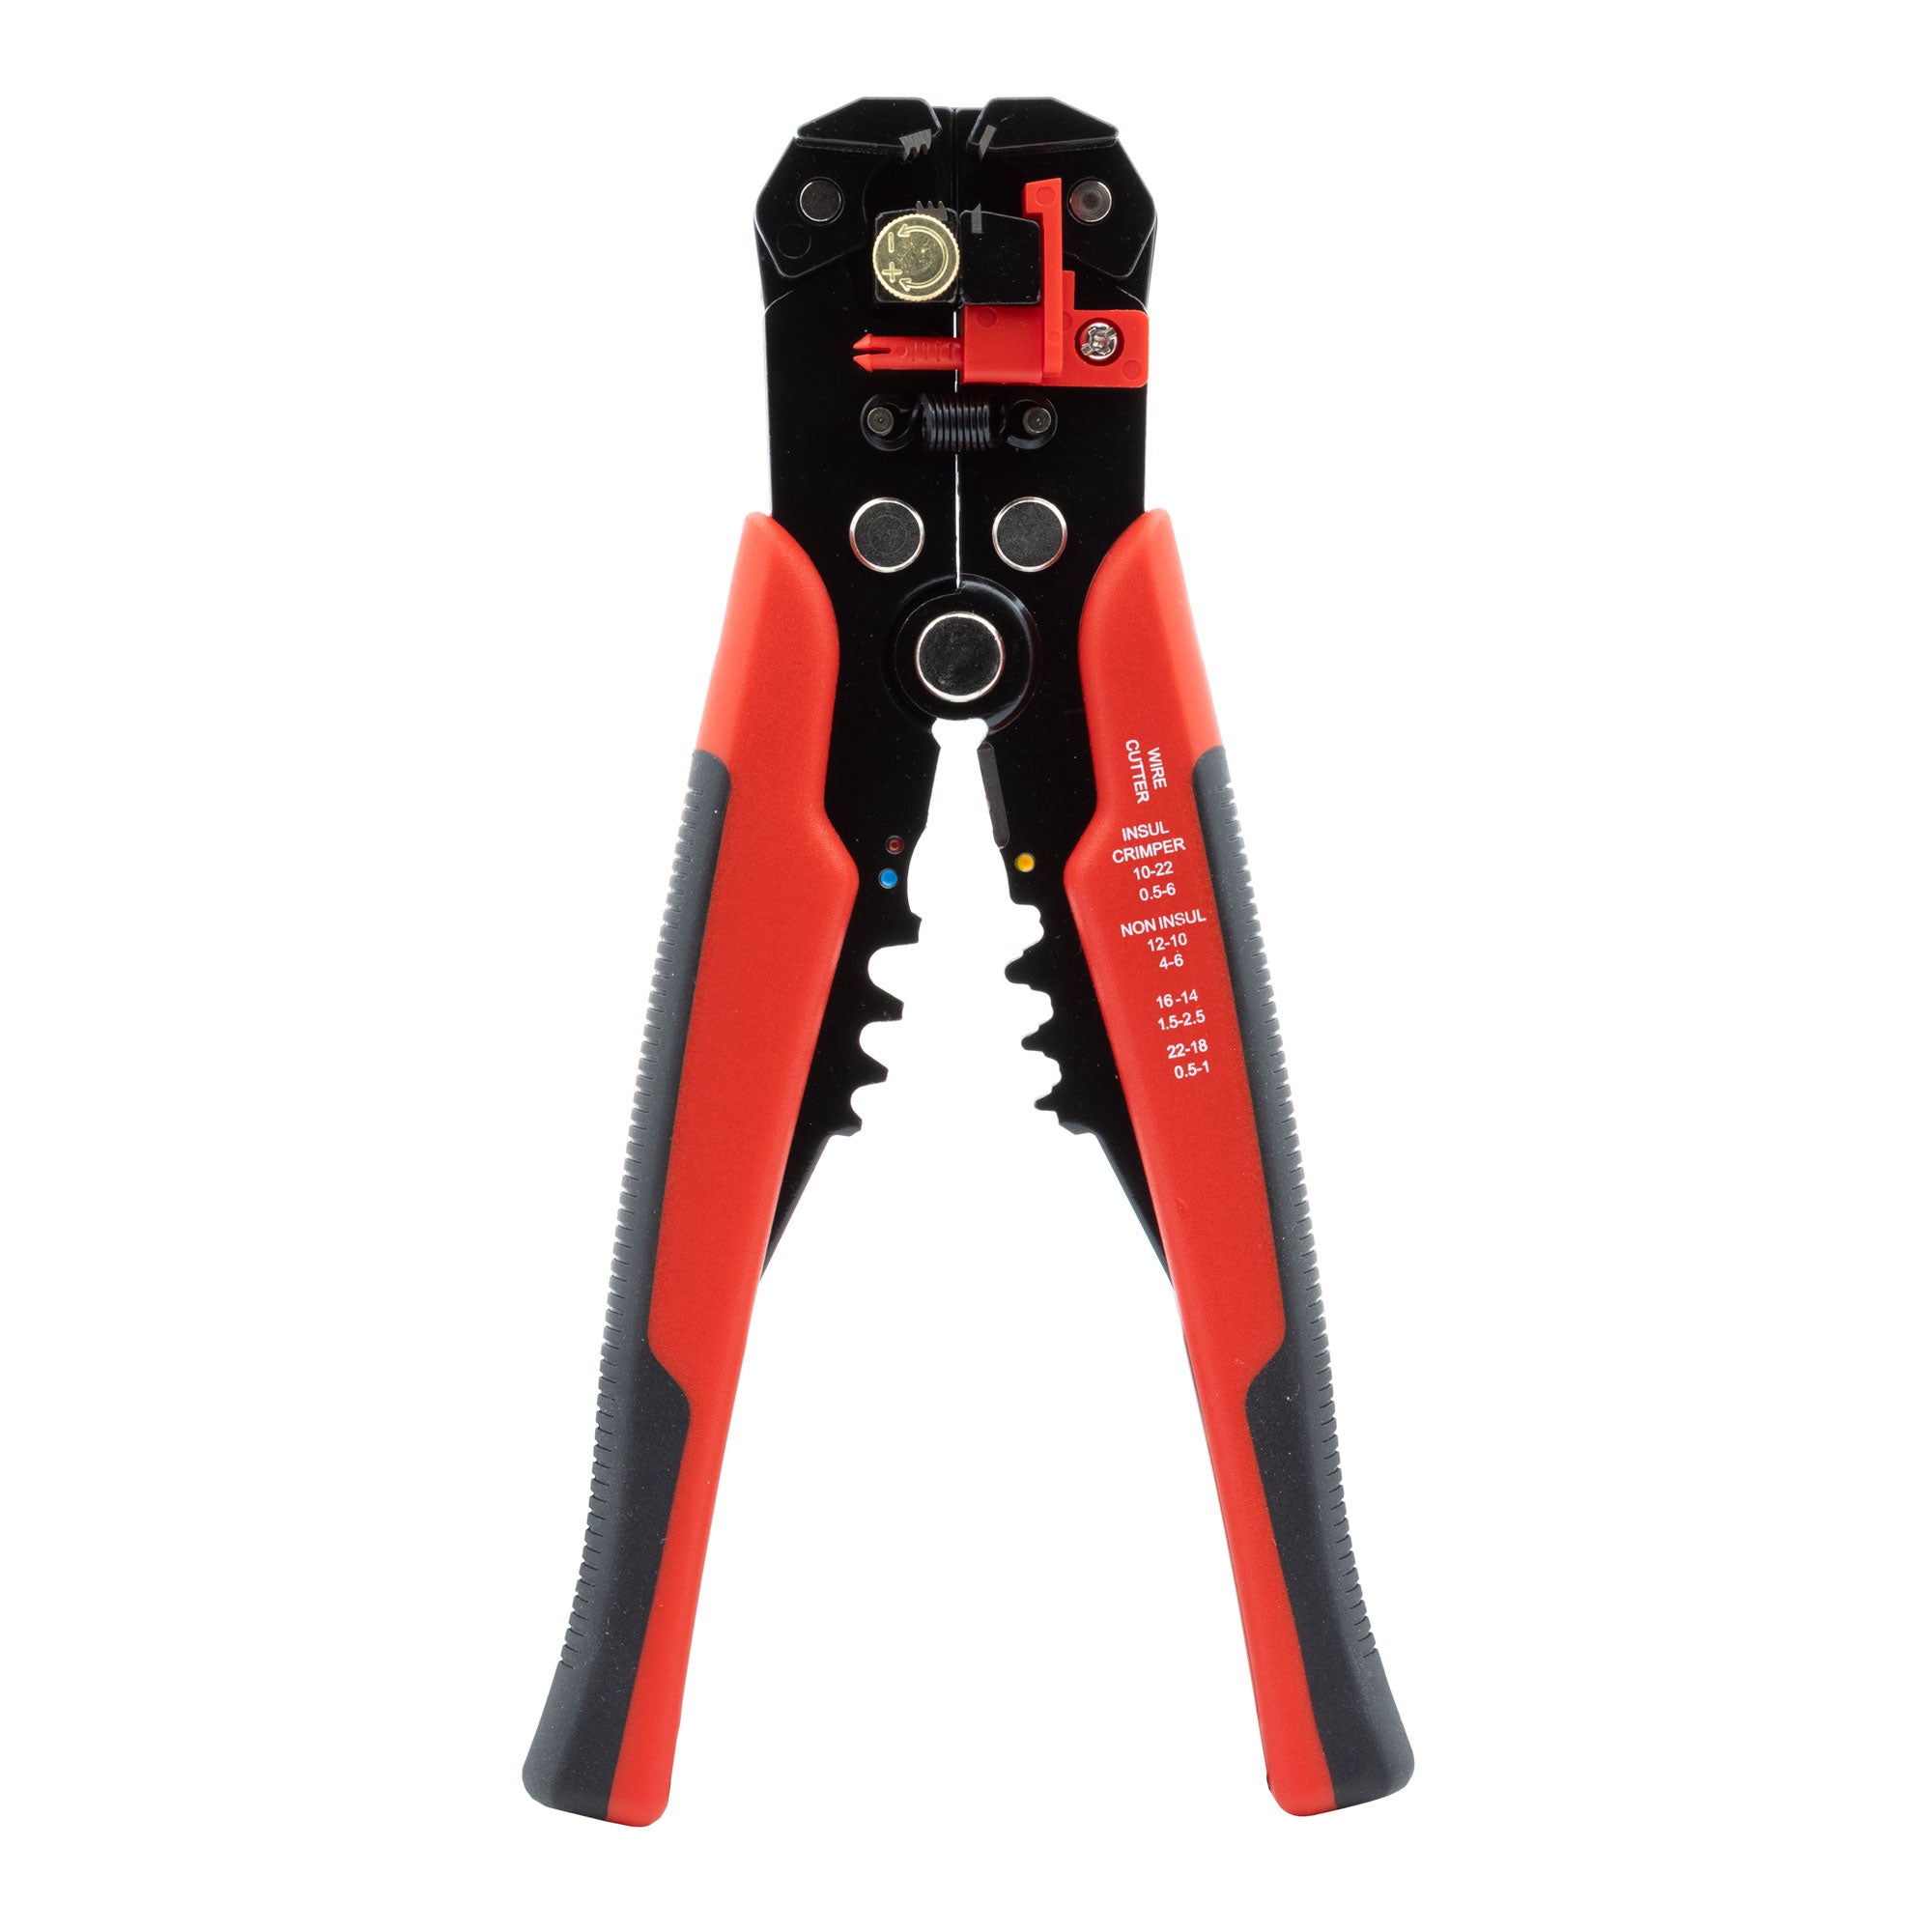 Rebuild Skills Automatic Electrical Wire Stripper for 10-24Awg Stranded or Solid Copper Cable